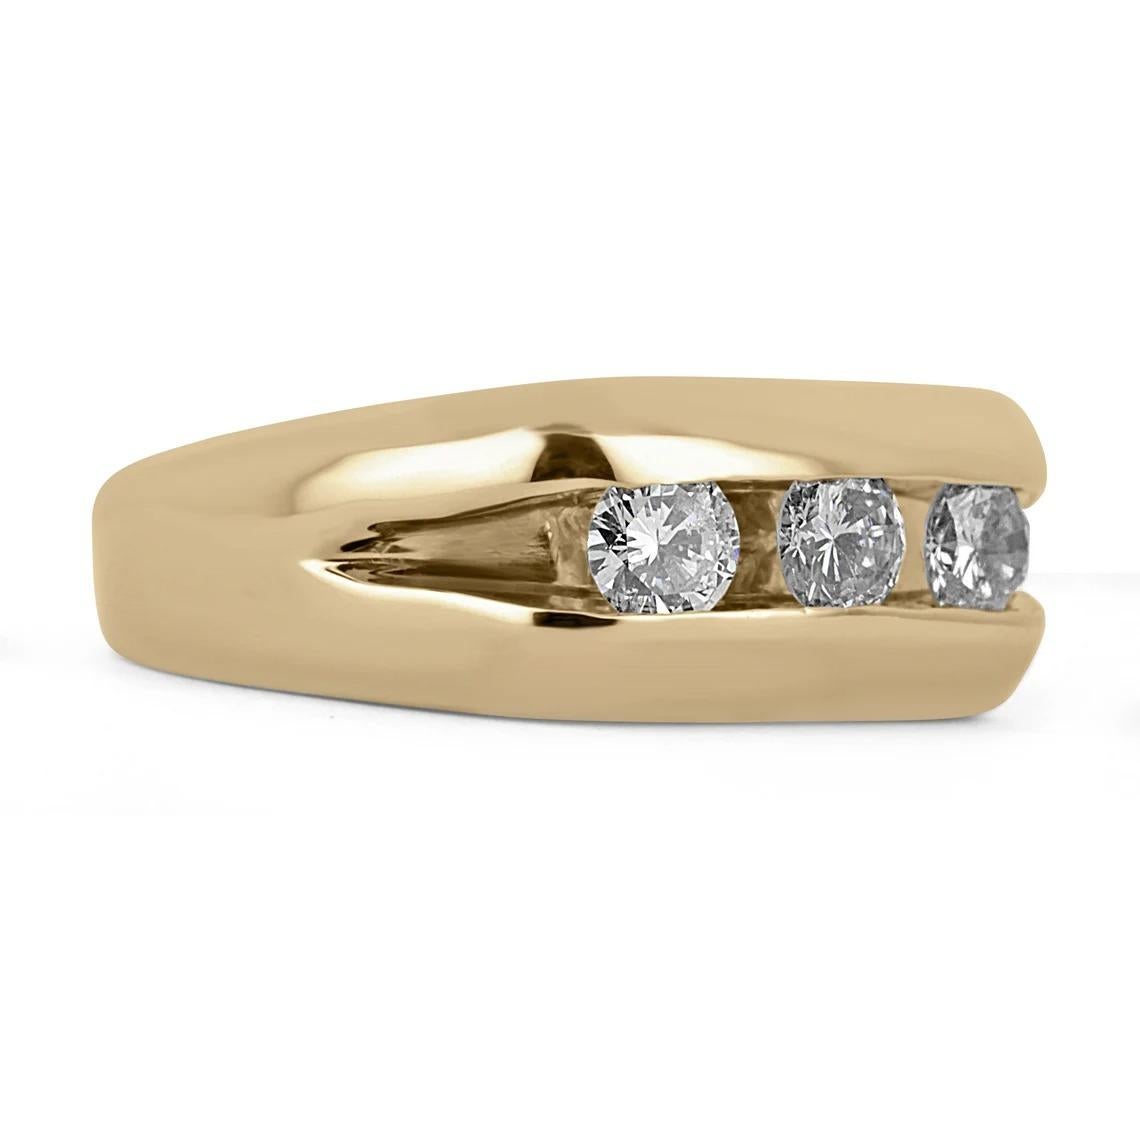 A beautiful three-stone diamond men's ring. Three, large, brilliant round cut diamonds tension set in a solid 14K yellow gold setting. The perfect statement piece, unisex as well.

Setting Style: Tension
Setting Material: 14K Yellow Gold
Setting